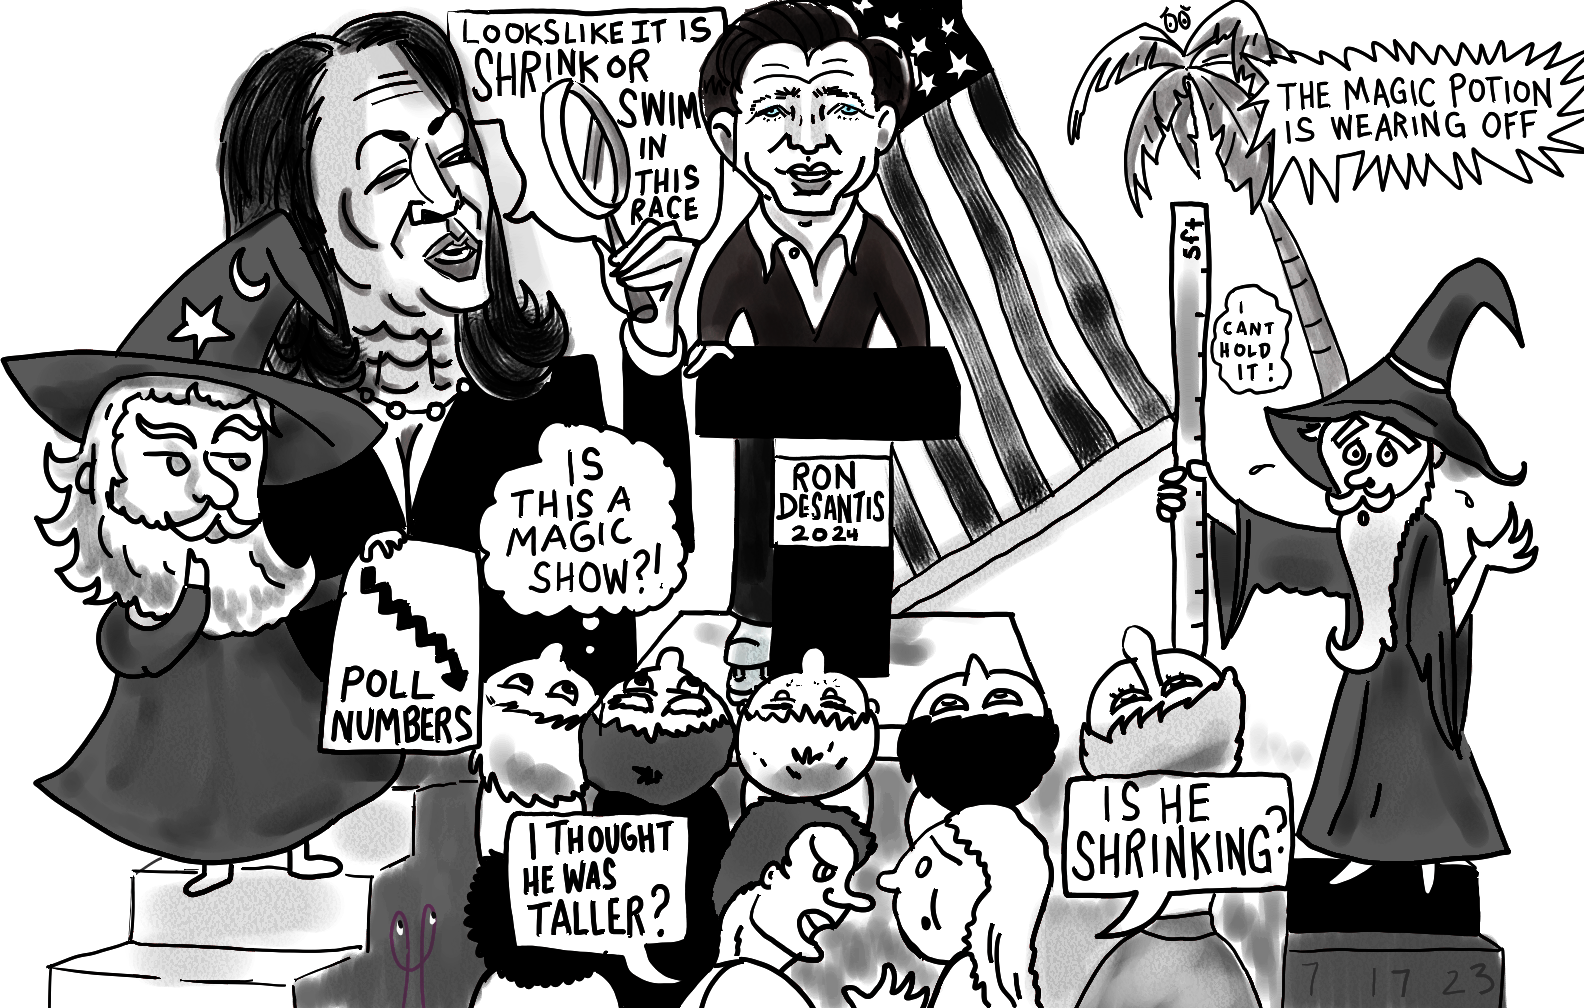 Ron Desantis the INCREDIBLE SHRINKING CANDIDATE political cartoon based on article by CHARLES HURT in Washington Times post thumbnail image